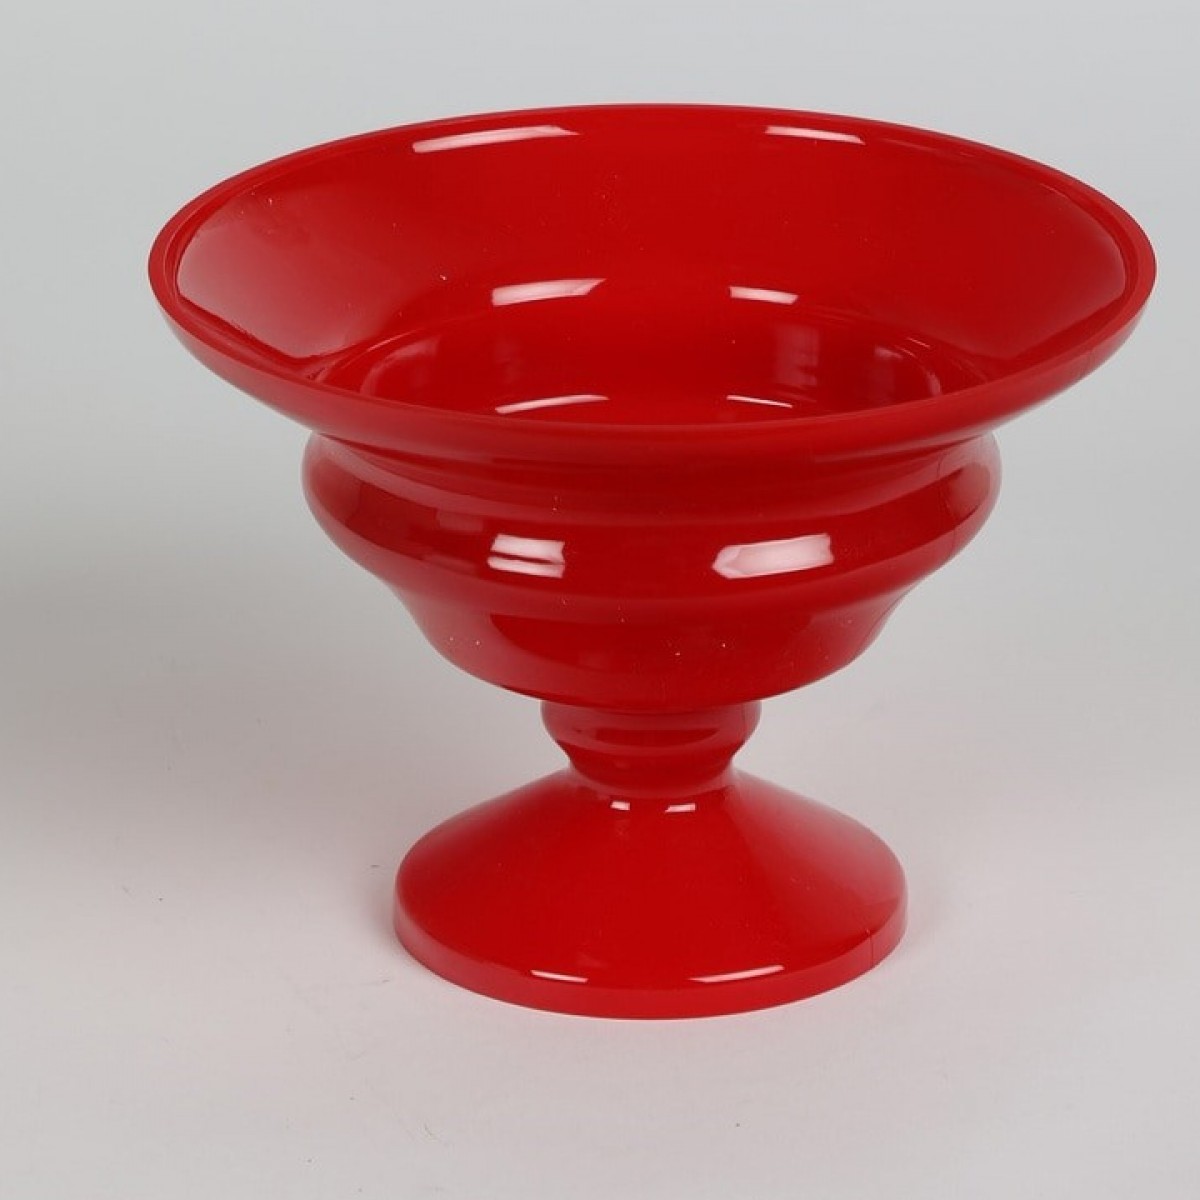 5141 Liad Bowl Red 18x13cm Acrylic Container - 1 No